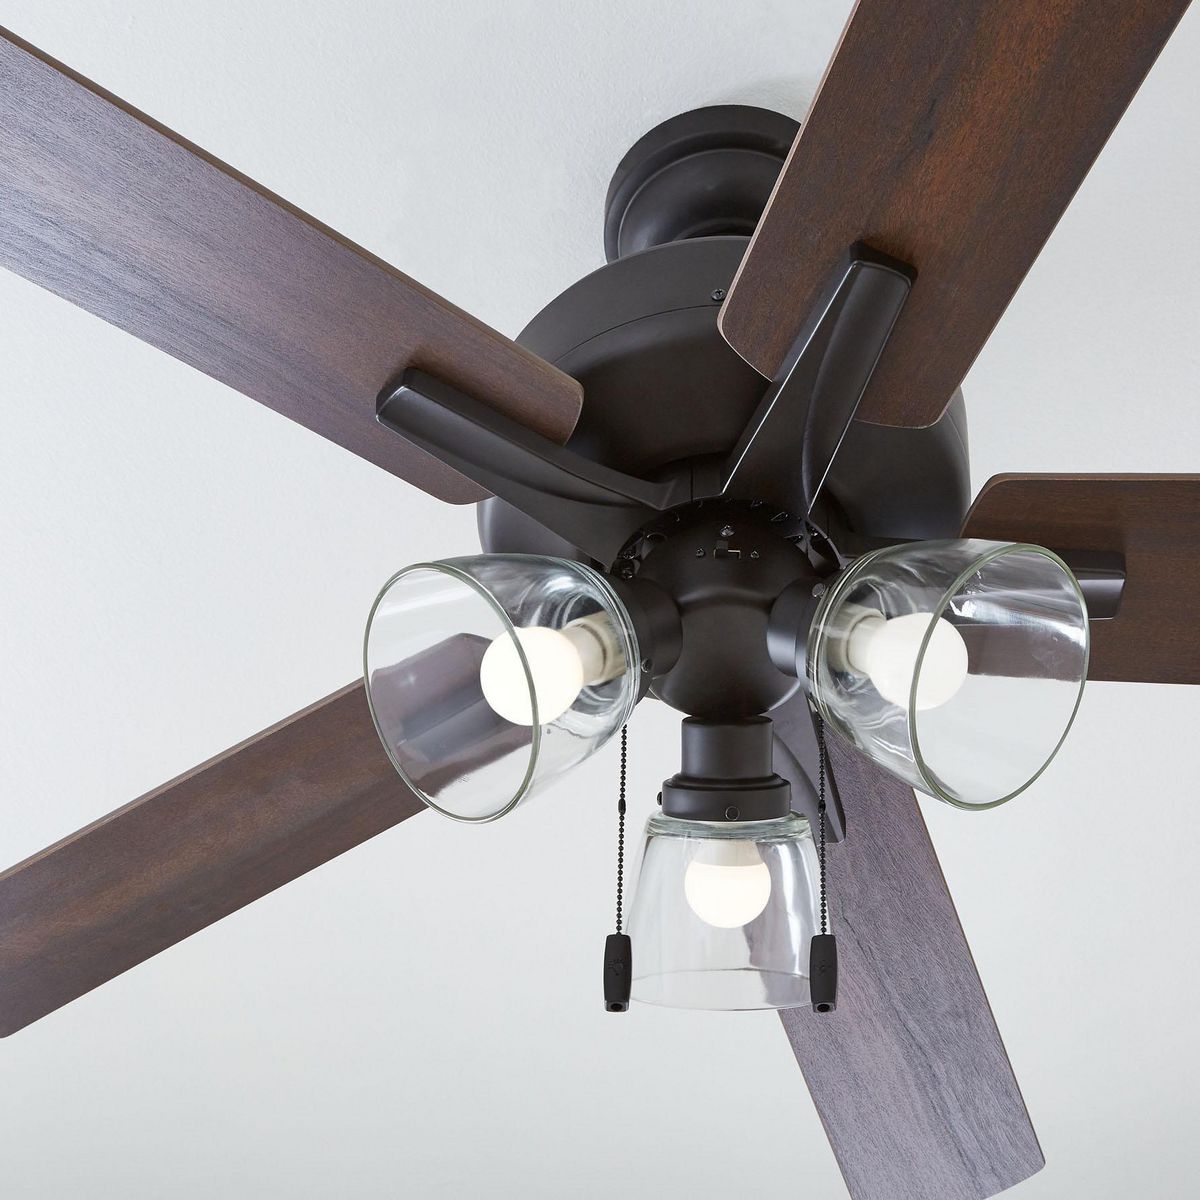 Better Homes & Gardens 52" Bronze Coastal Ceiling Fan, 5 Reversible Blade, 3 LED Bulbs Included - image 3 of 10